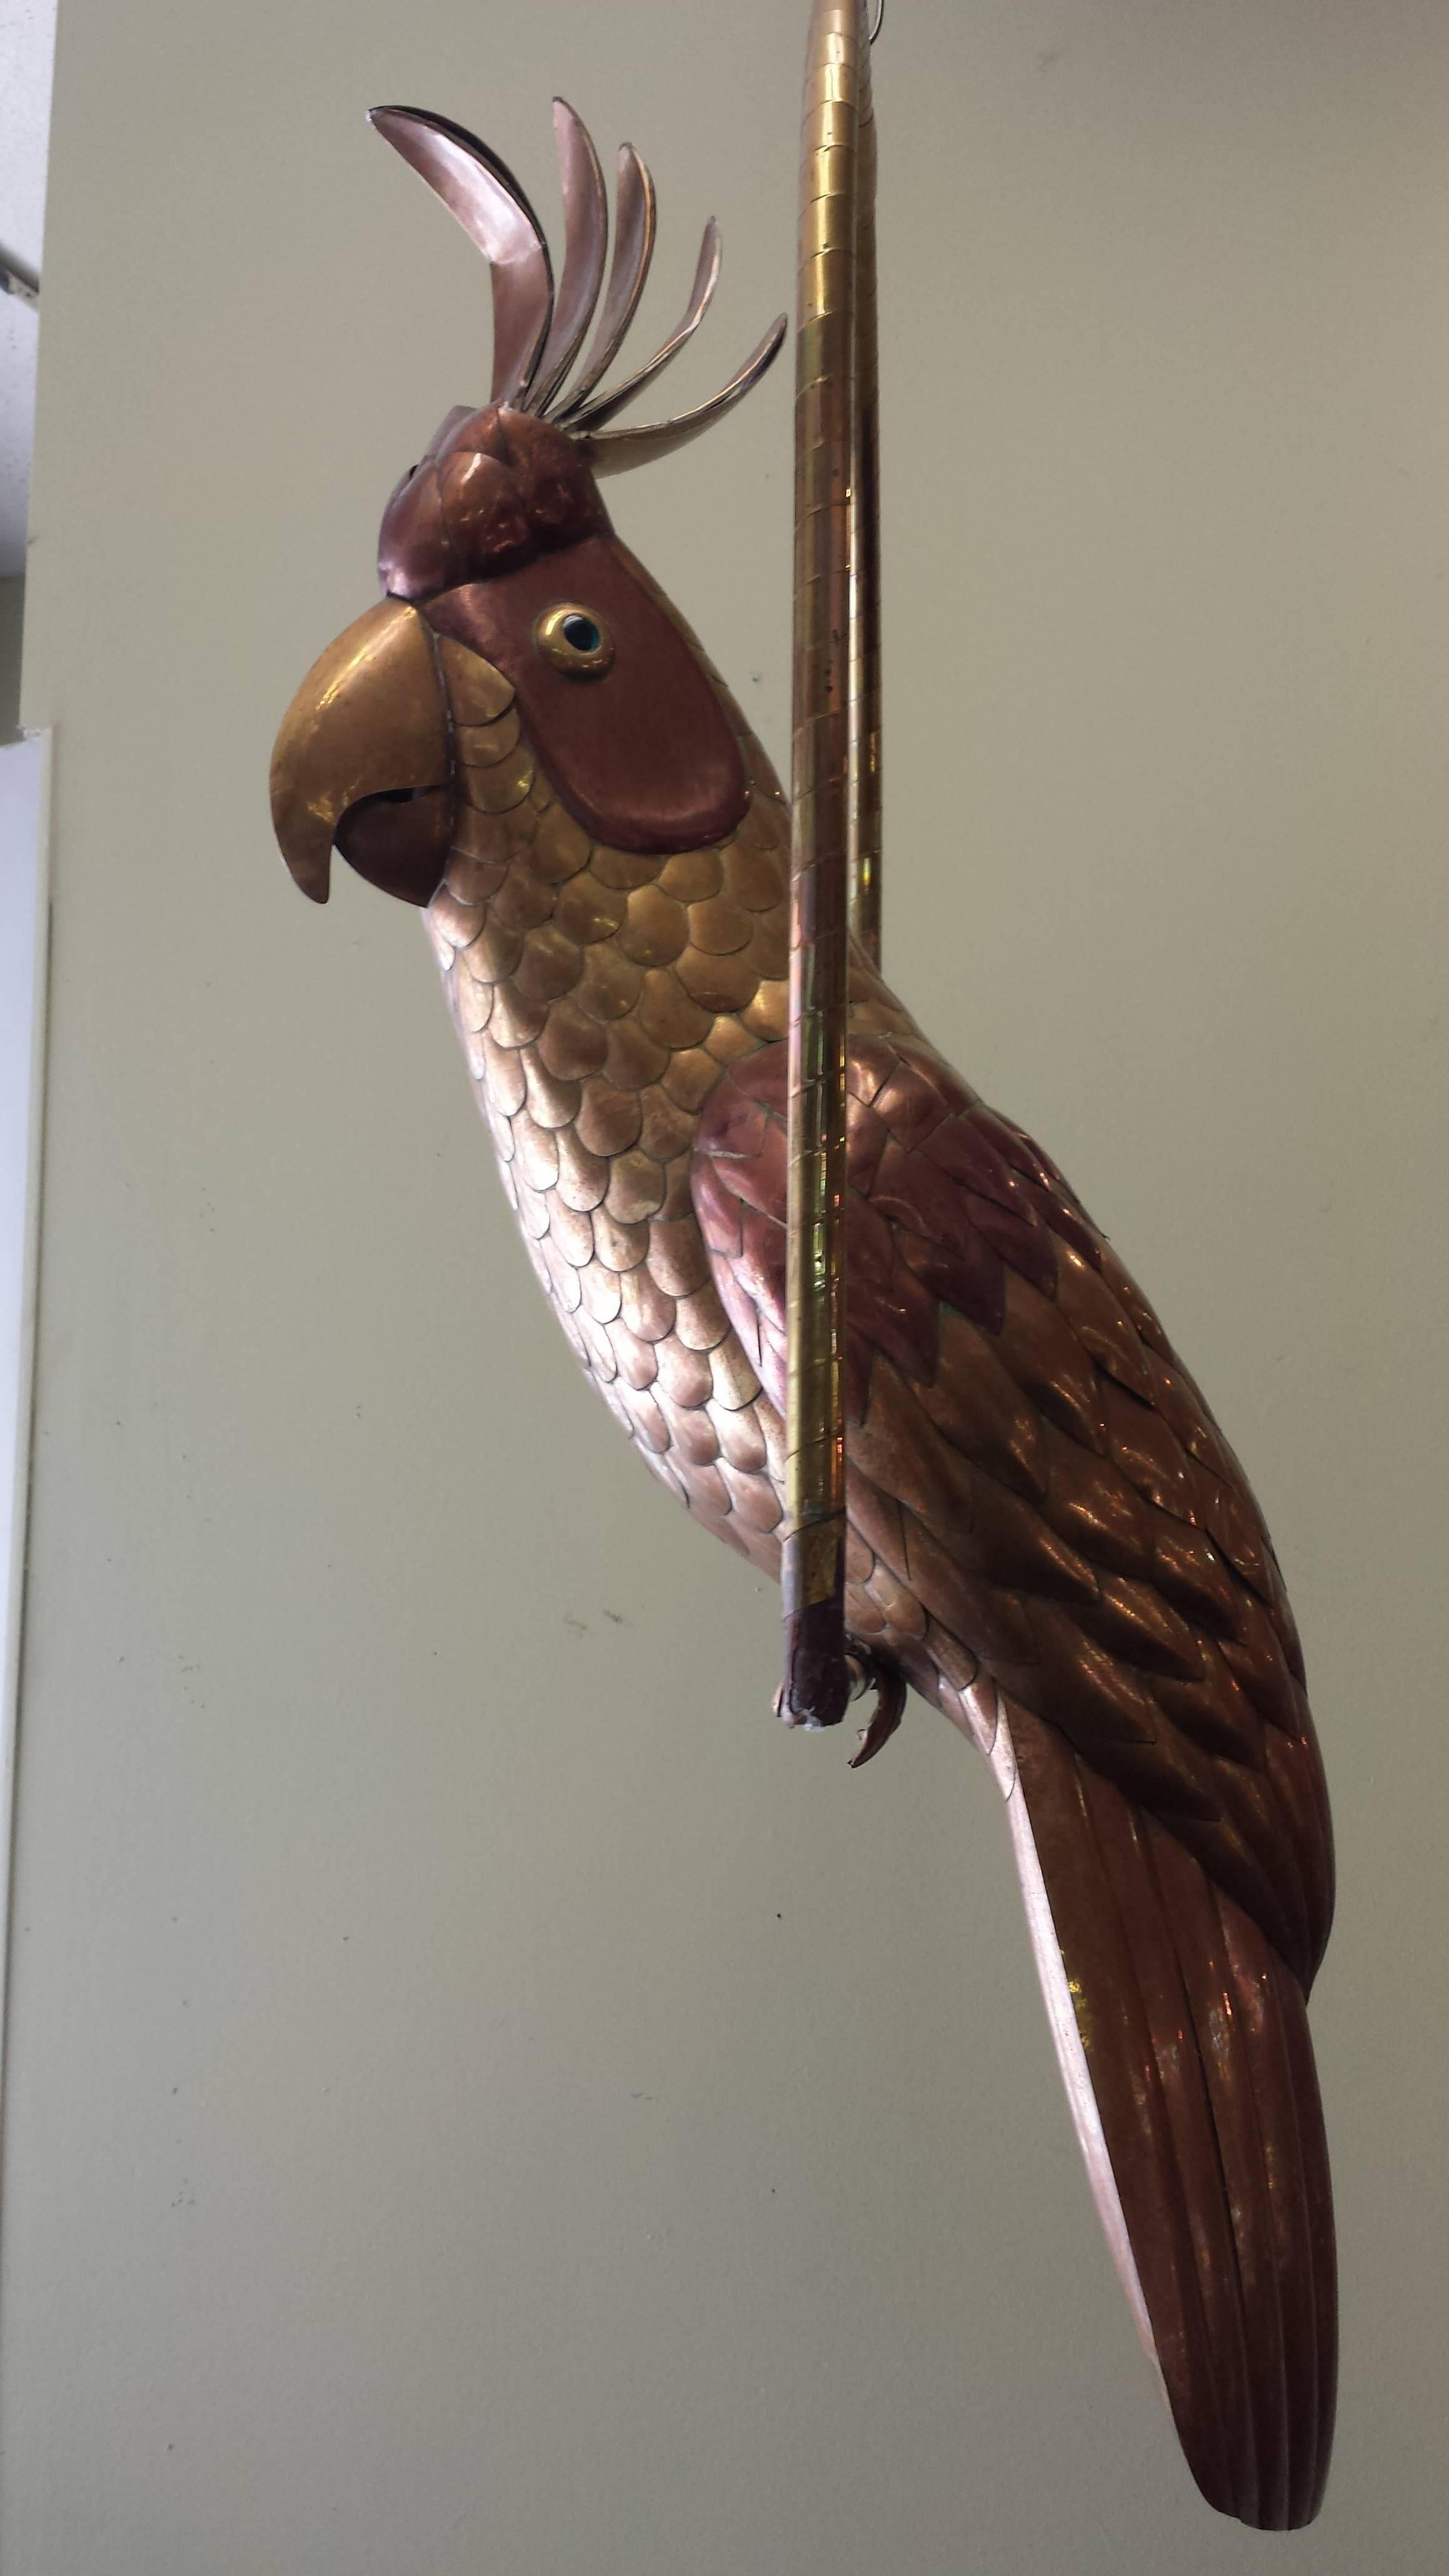 A large brass and copper cockatoo by Sergio Bustamante, 1960s, sculpted cockatoo on perch by Mexican artist Sergio Bustamante, nice large-scale and craftsmanship in its original mixed metals patina, on a swing perch. The cockatoo measures 30"